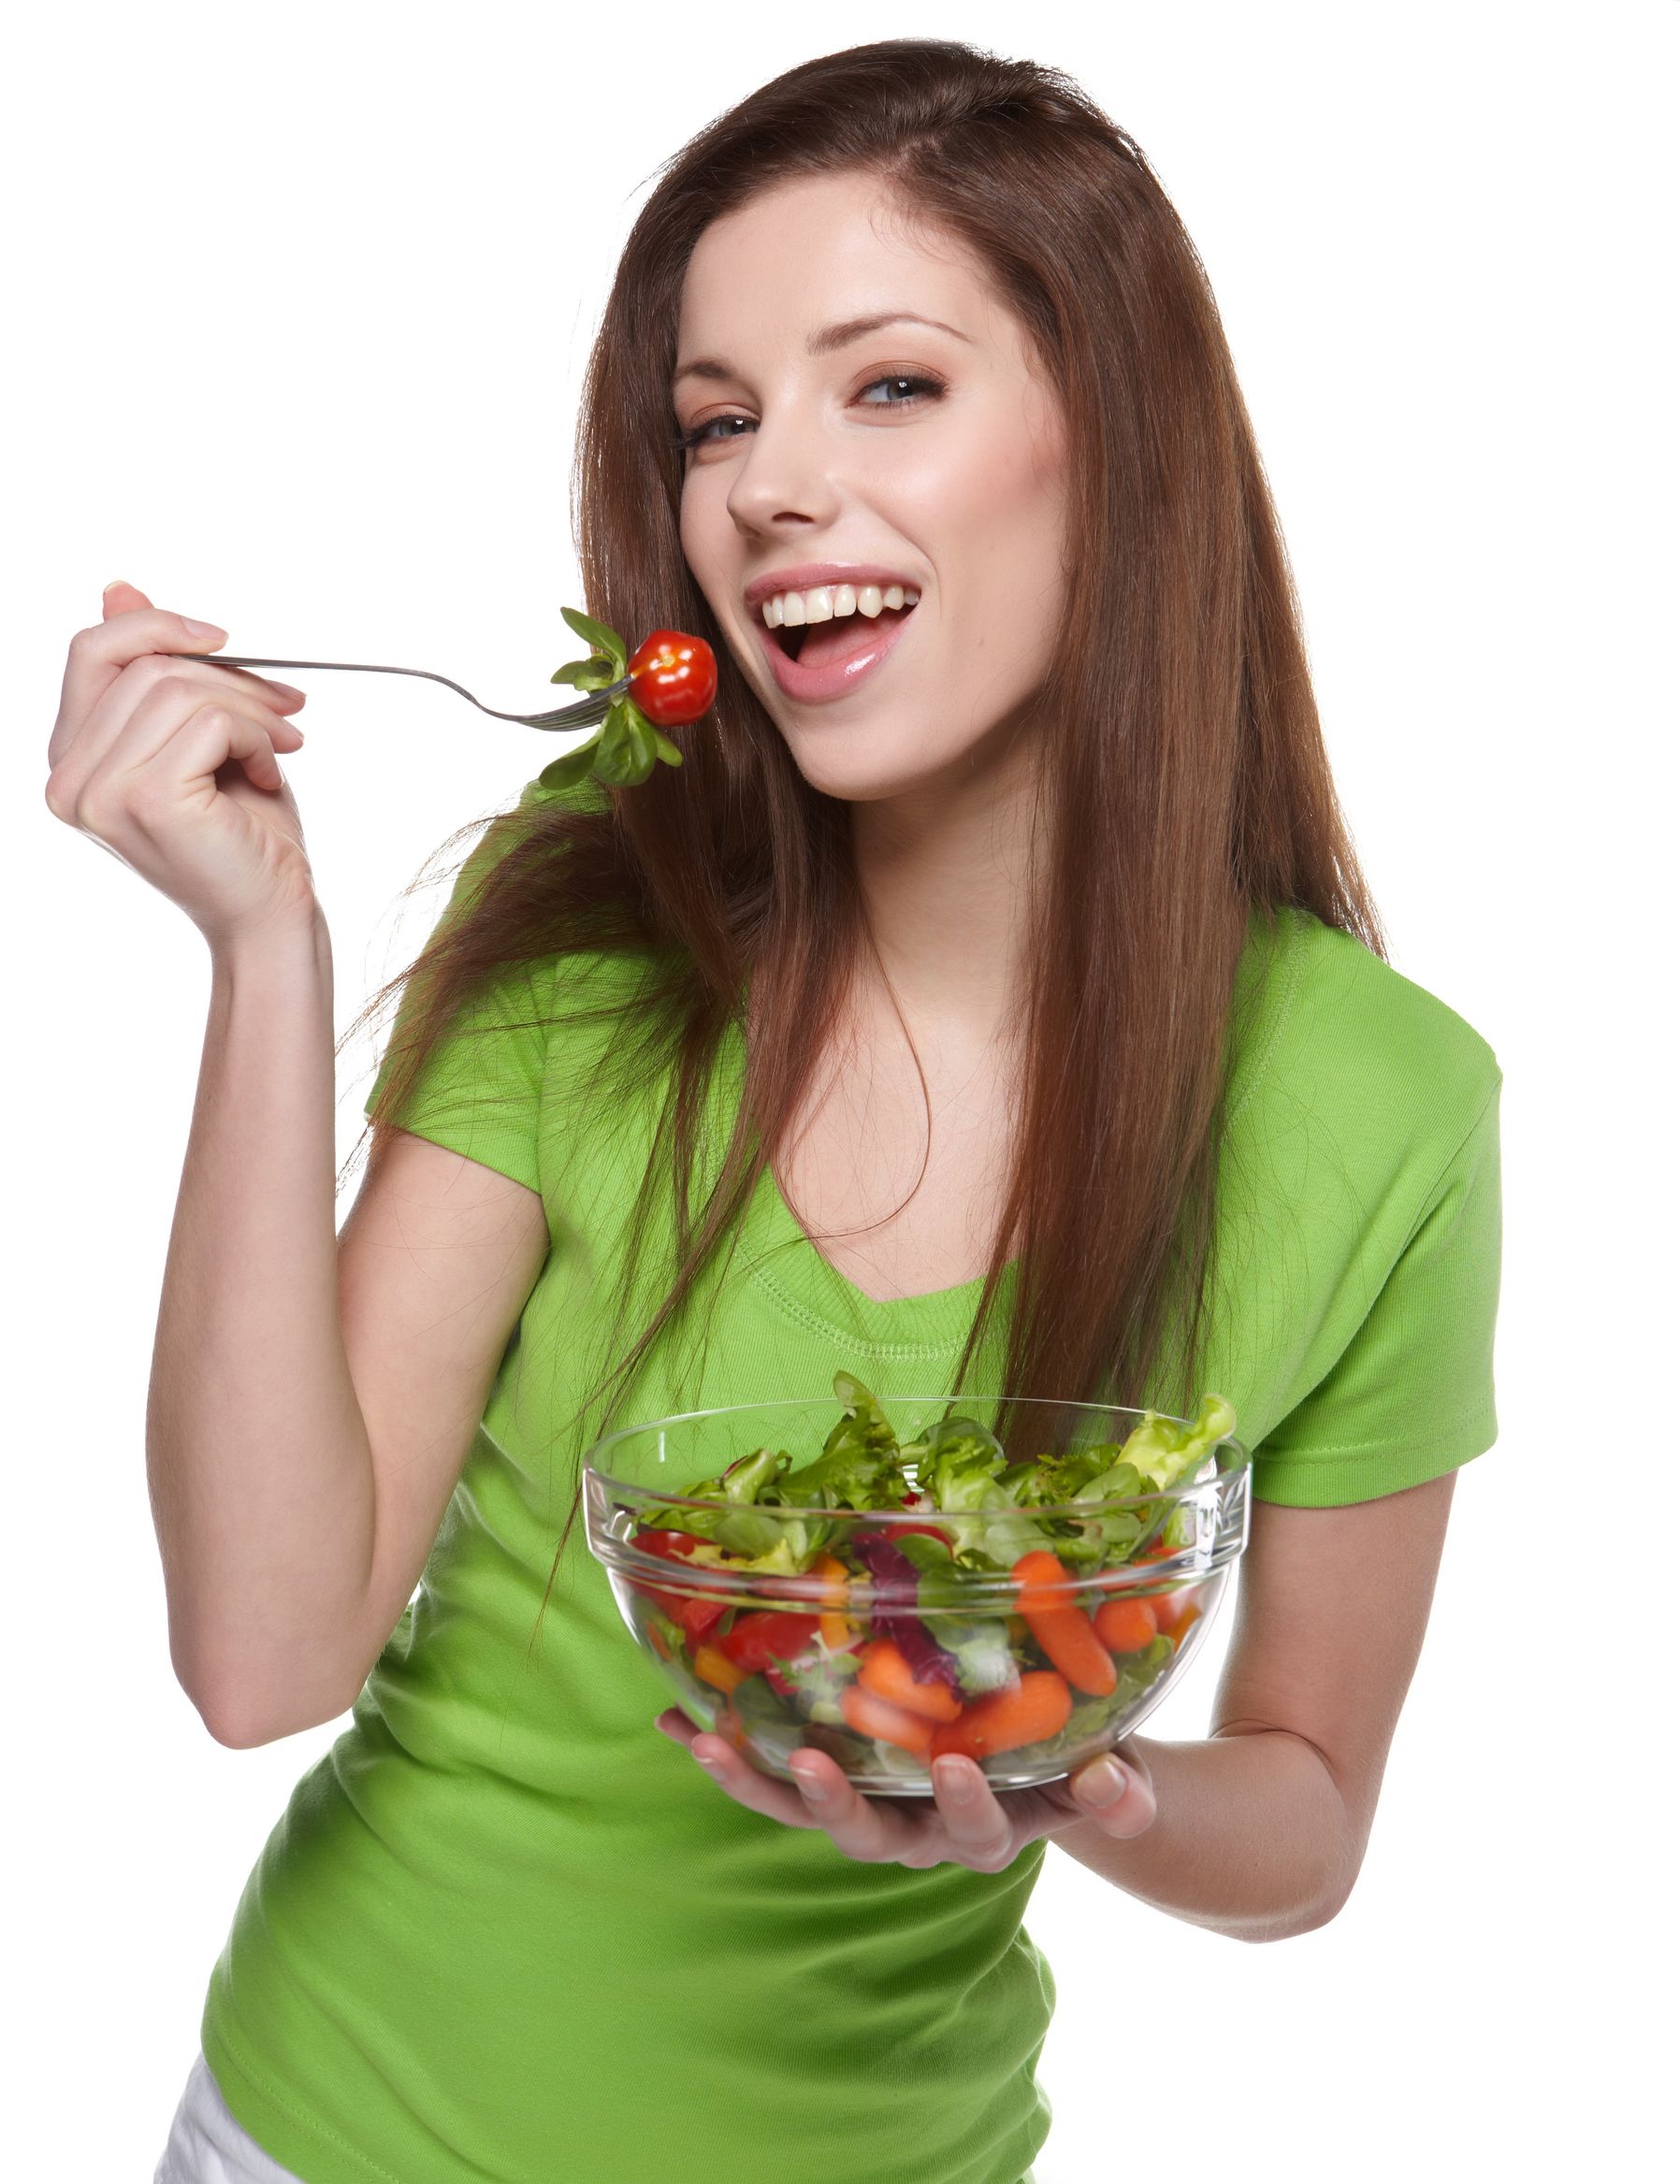 13901667 - woman with salad isolated on white